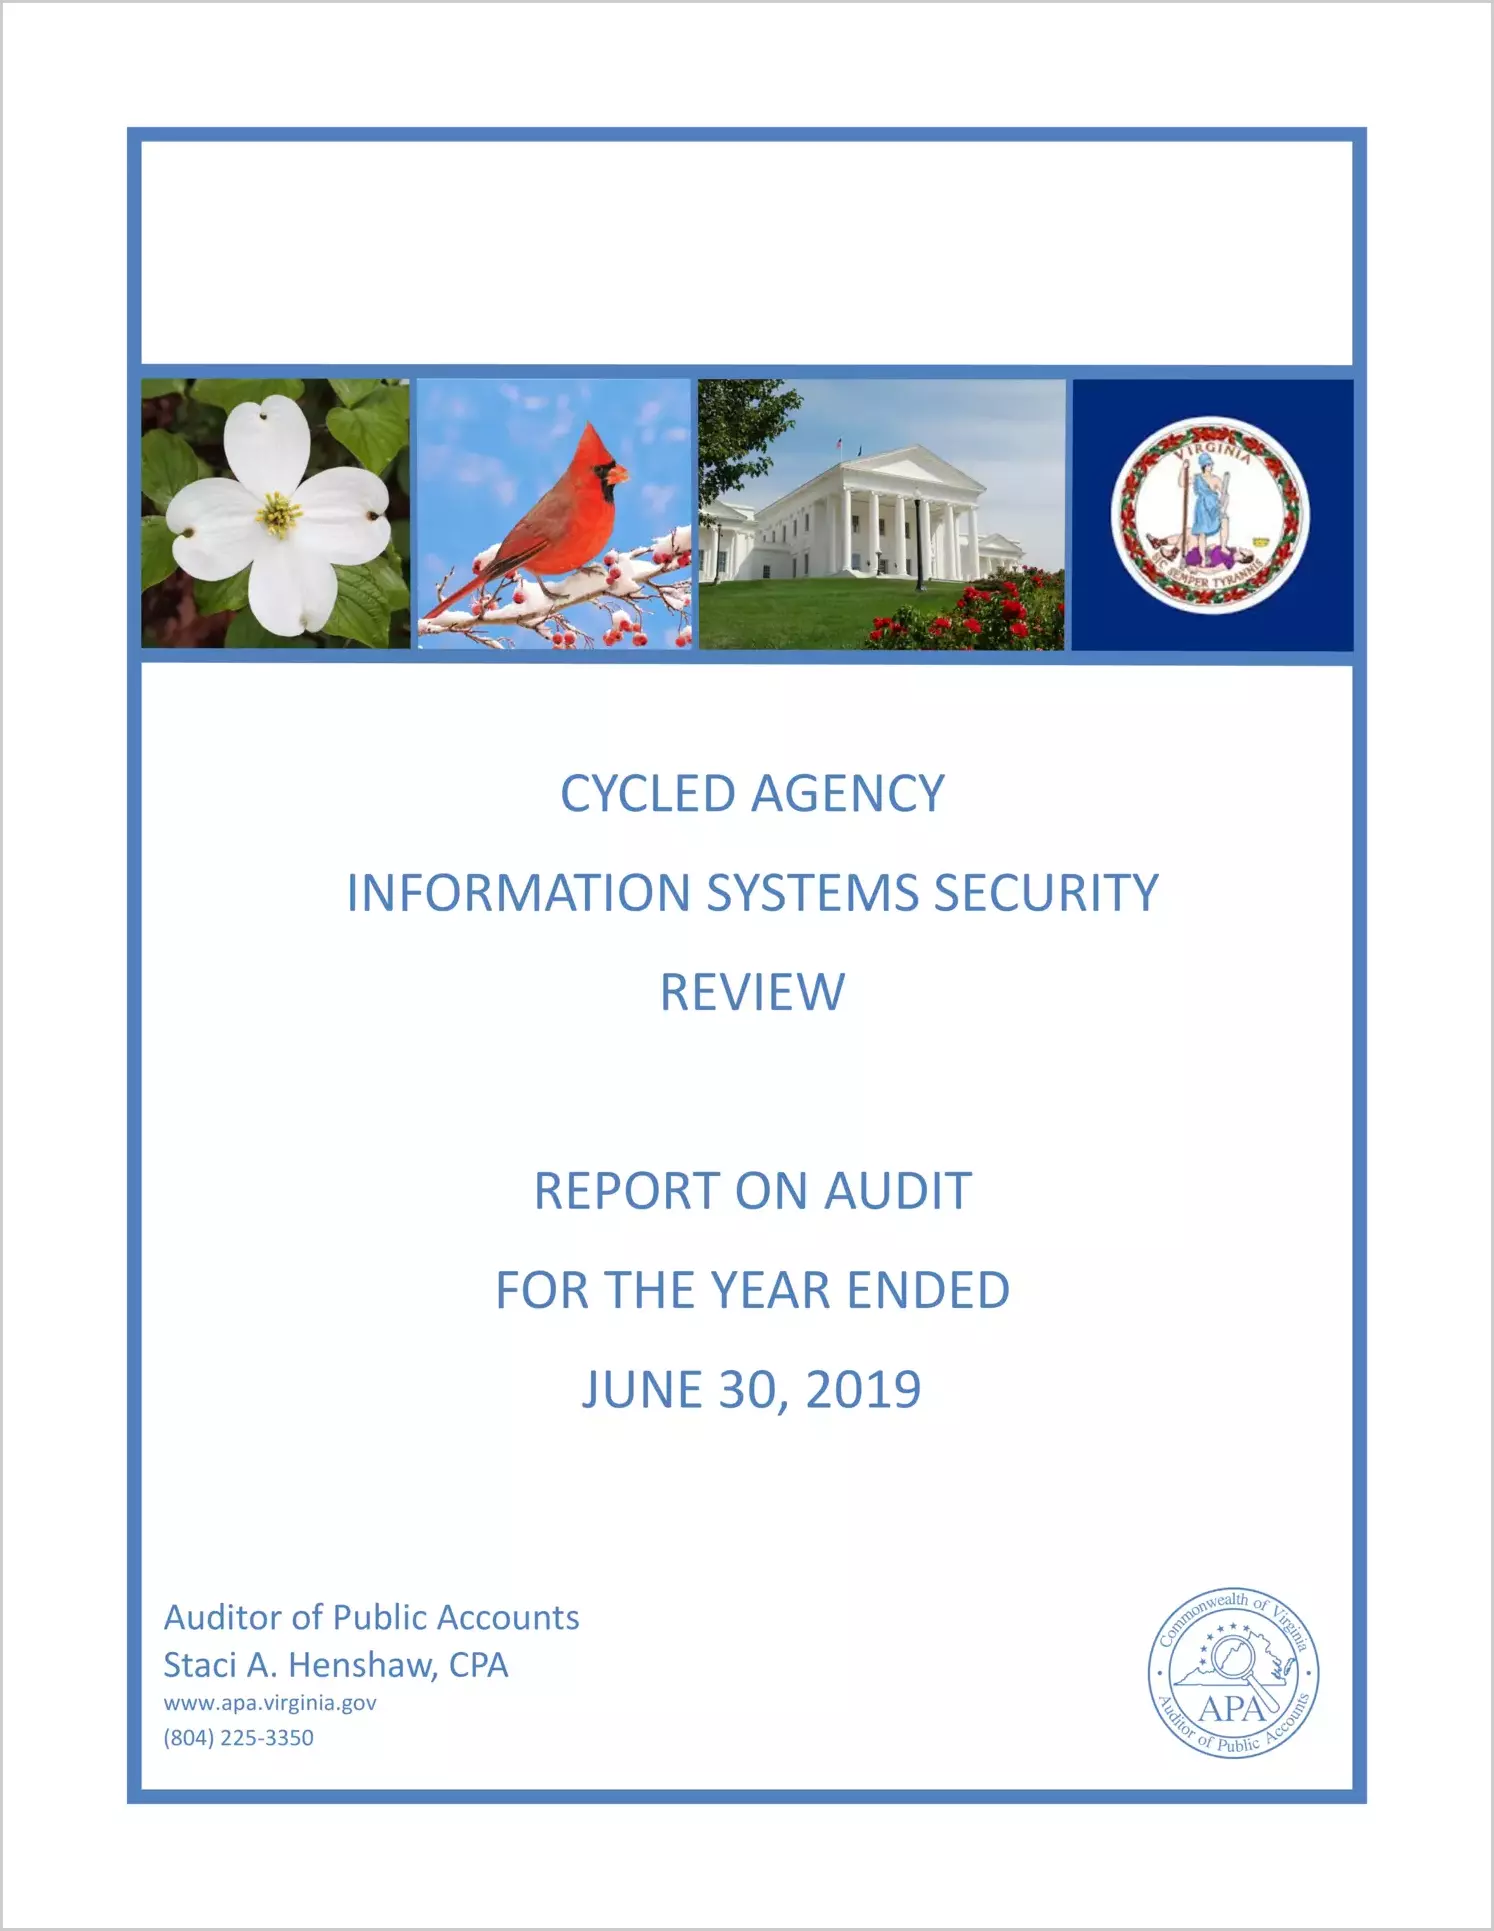 Cycled Agency Information Systems Security Review for the year ended June 30, 2019